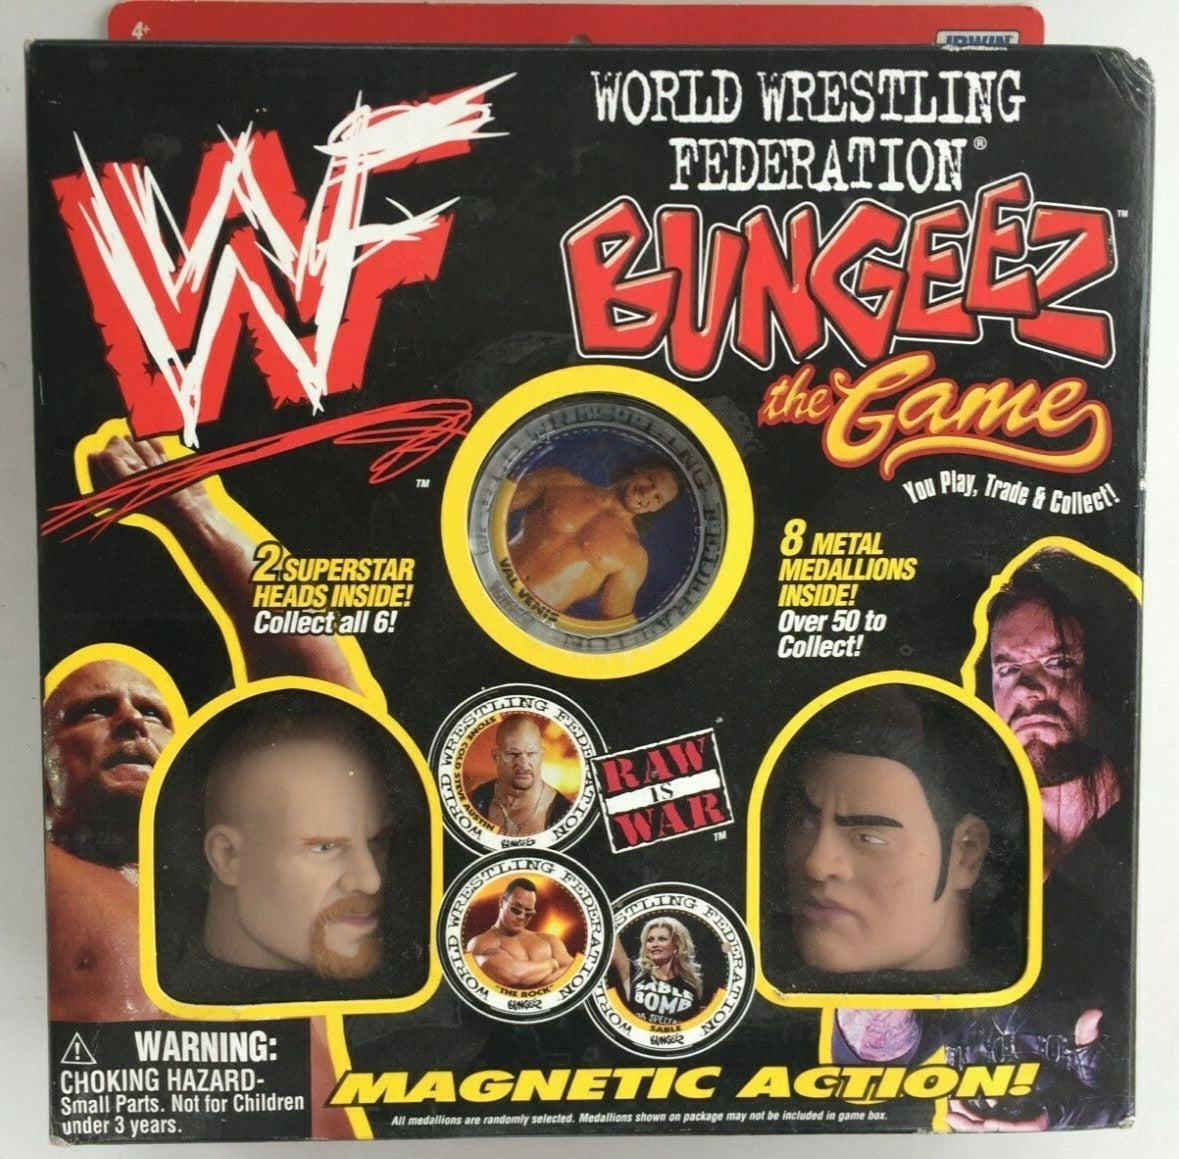 1999 WWF Irwin Toy Bungeez the Game [With Stone Cold Steve Austin & The Rock]